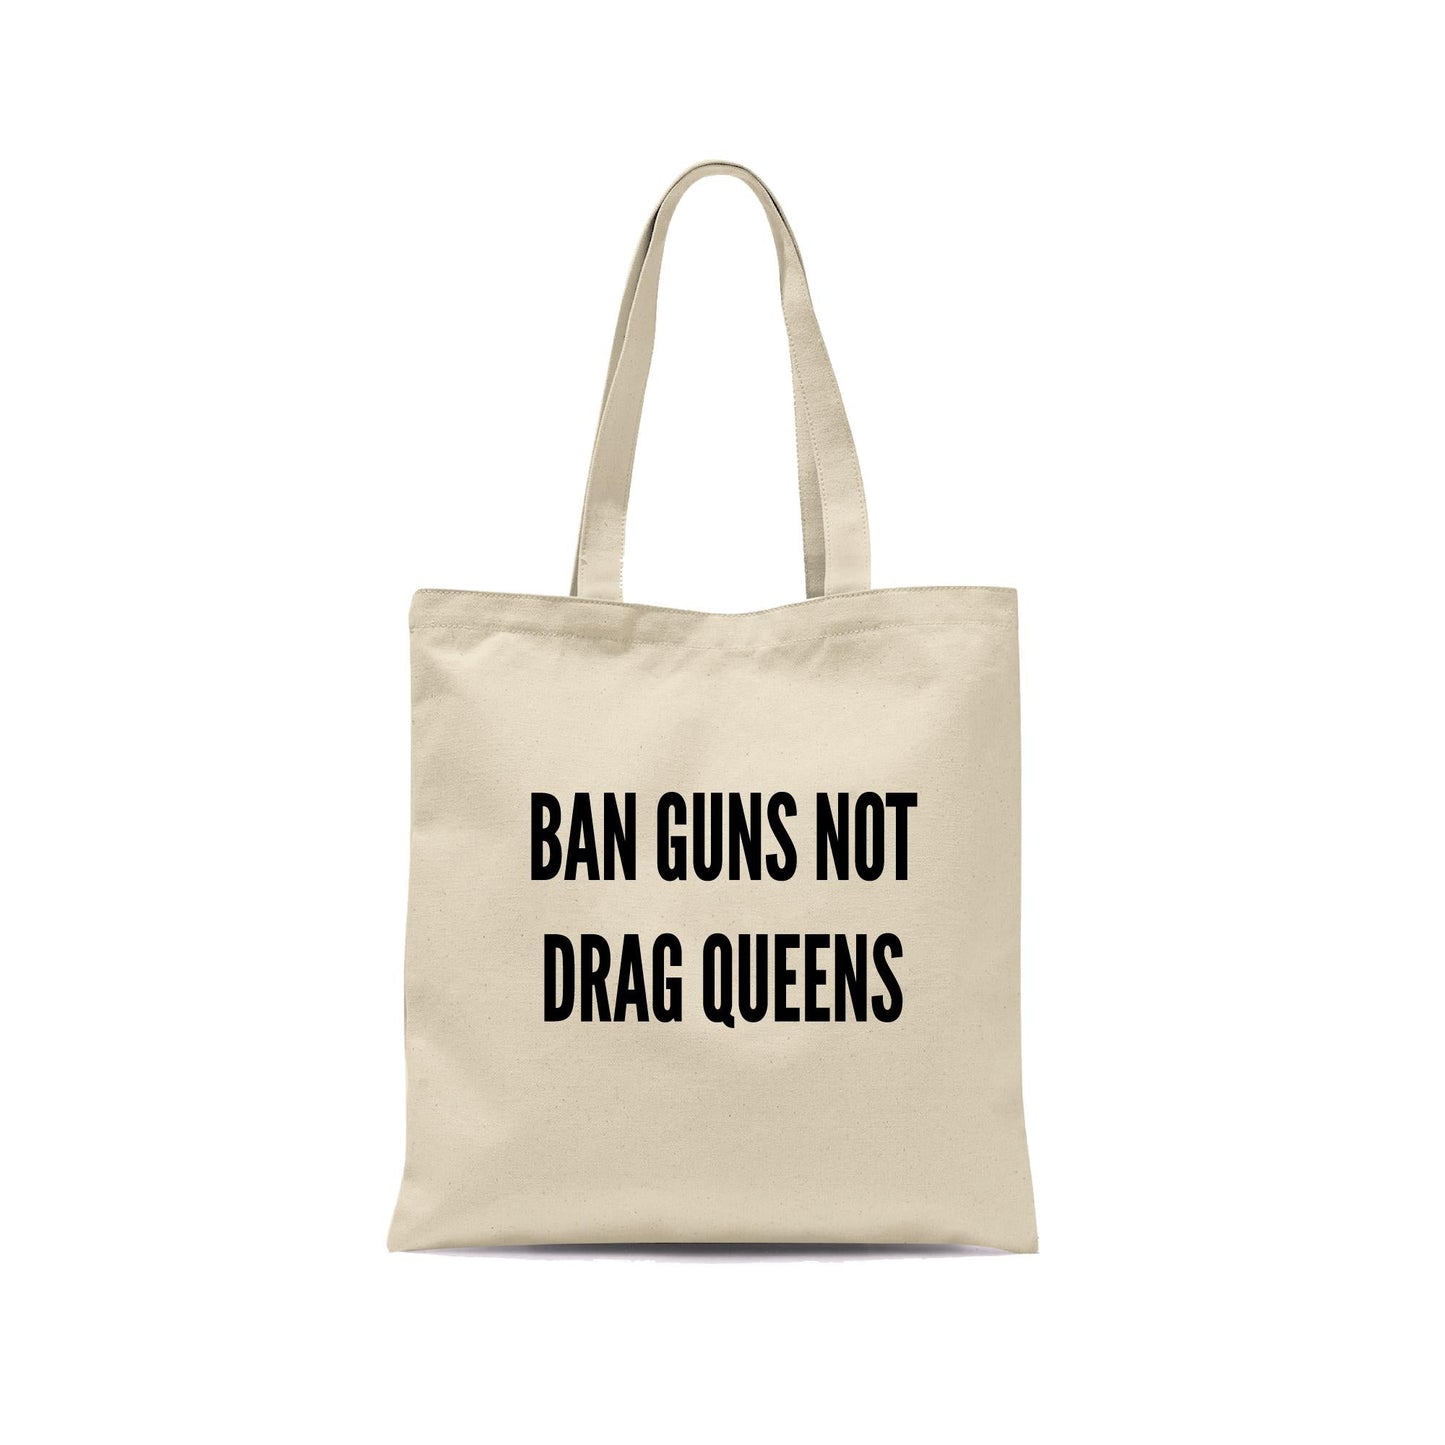 Ban G*ns Not Drag Queens Tote Bag-Totes-Crimson and Clover Studio